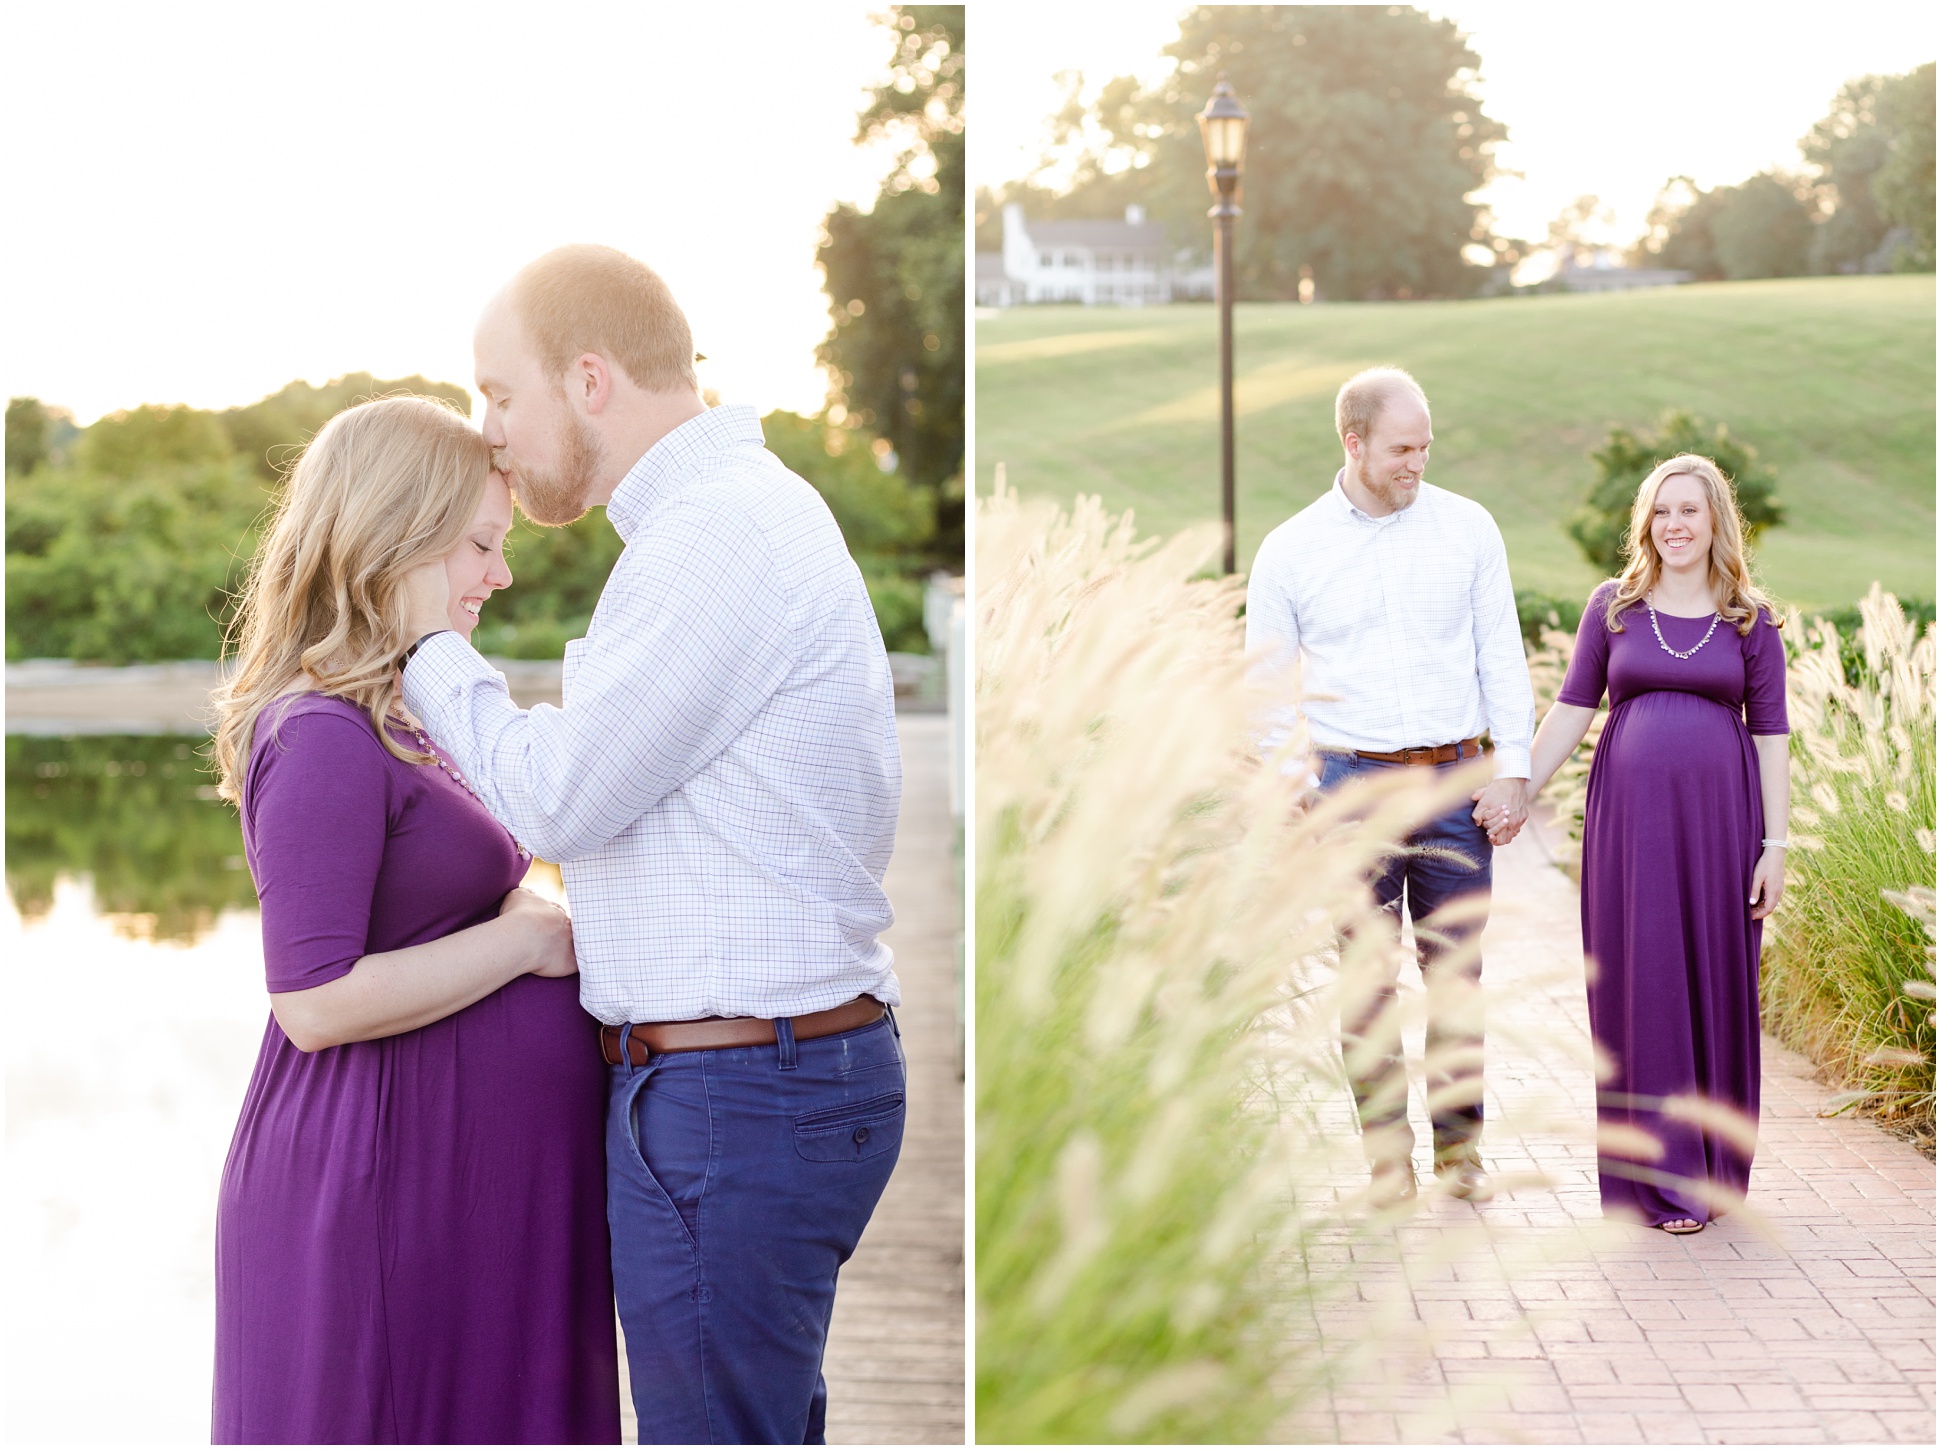 Man kissing pregnant woman's forehead and man and pregnant woman walking